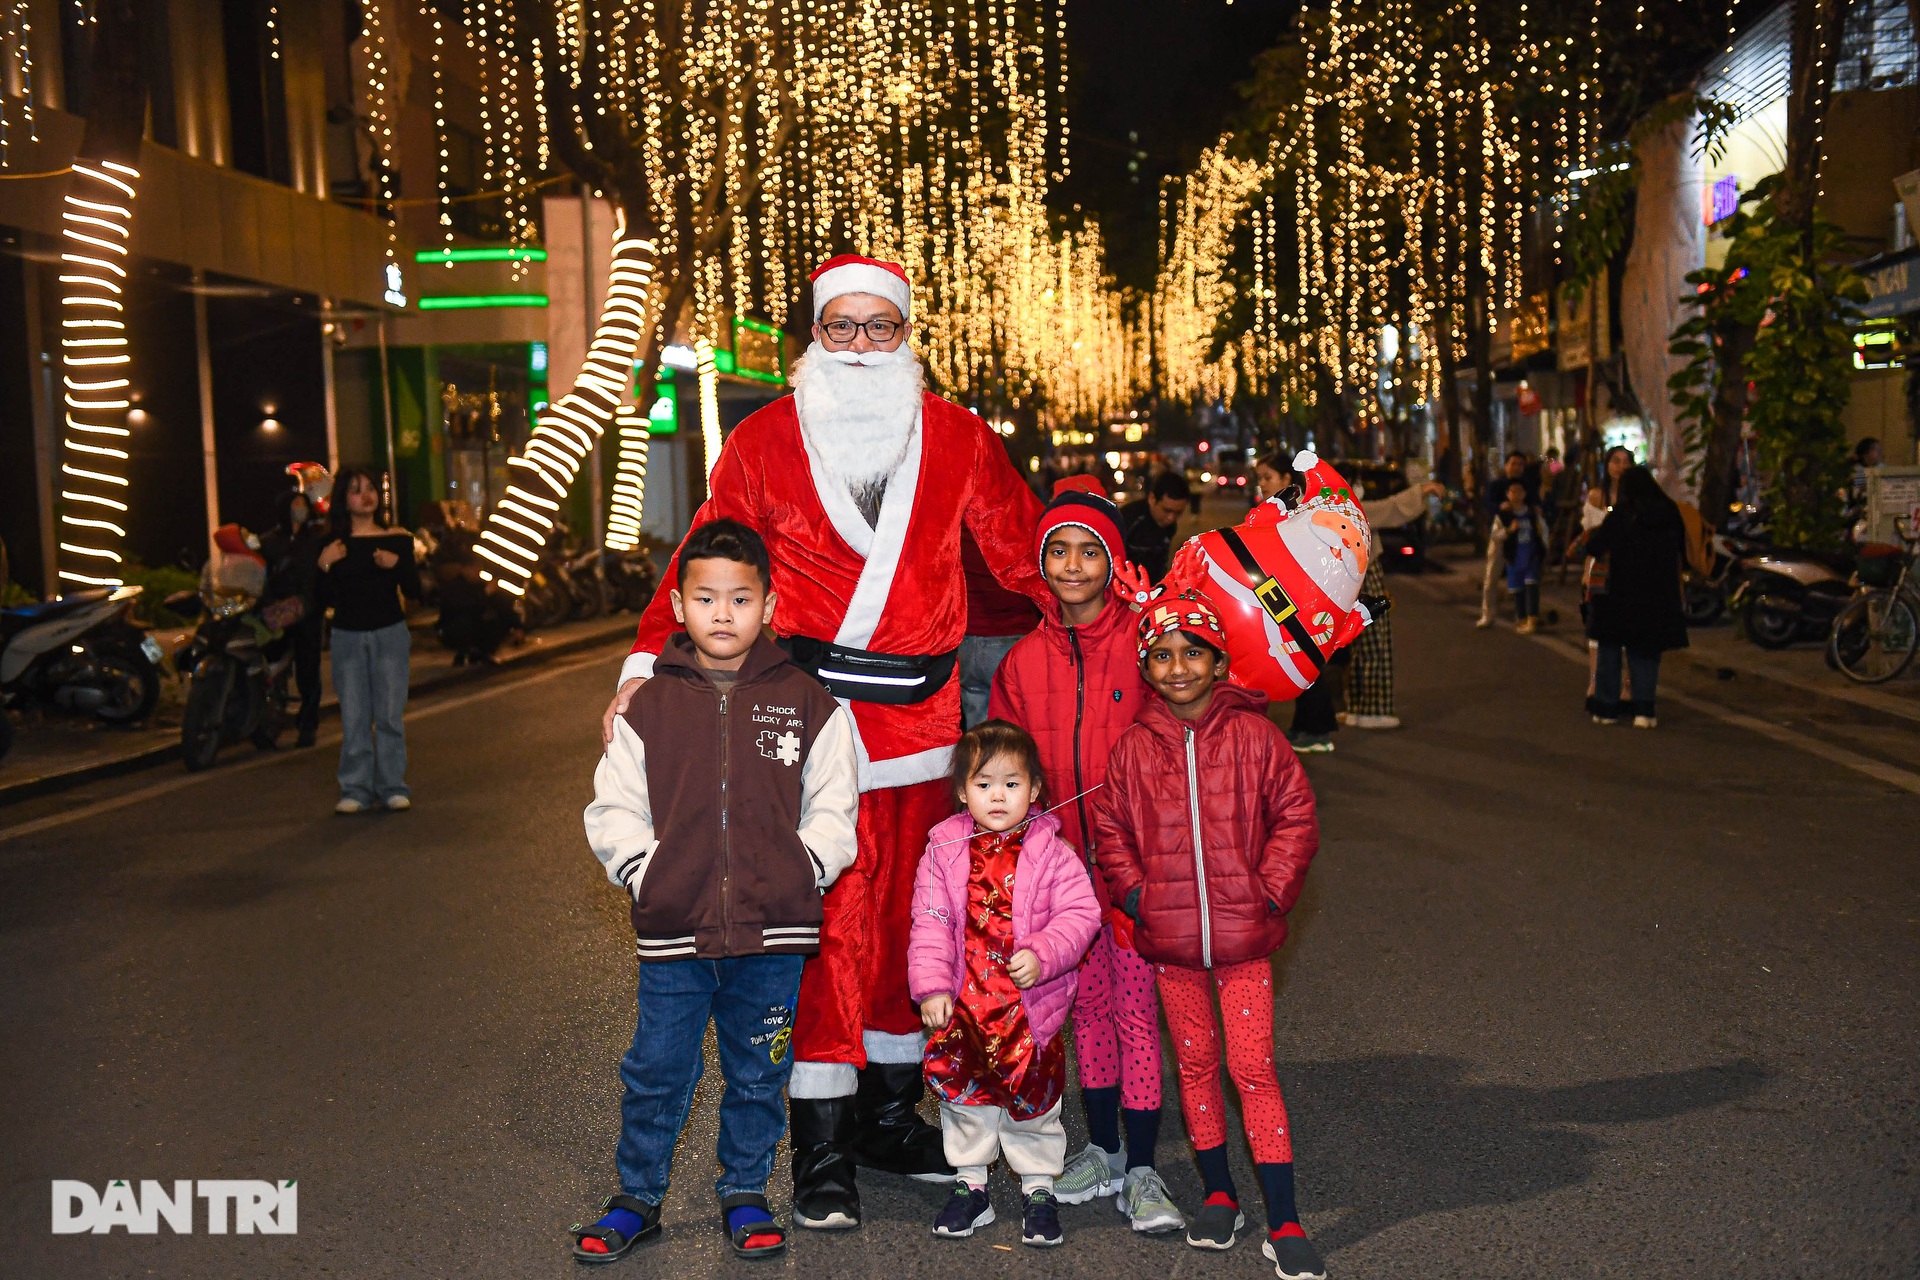 Western tourists enjoy celebrating Christmas in Hanoi: There are Santa Clauses everywhere - 6